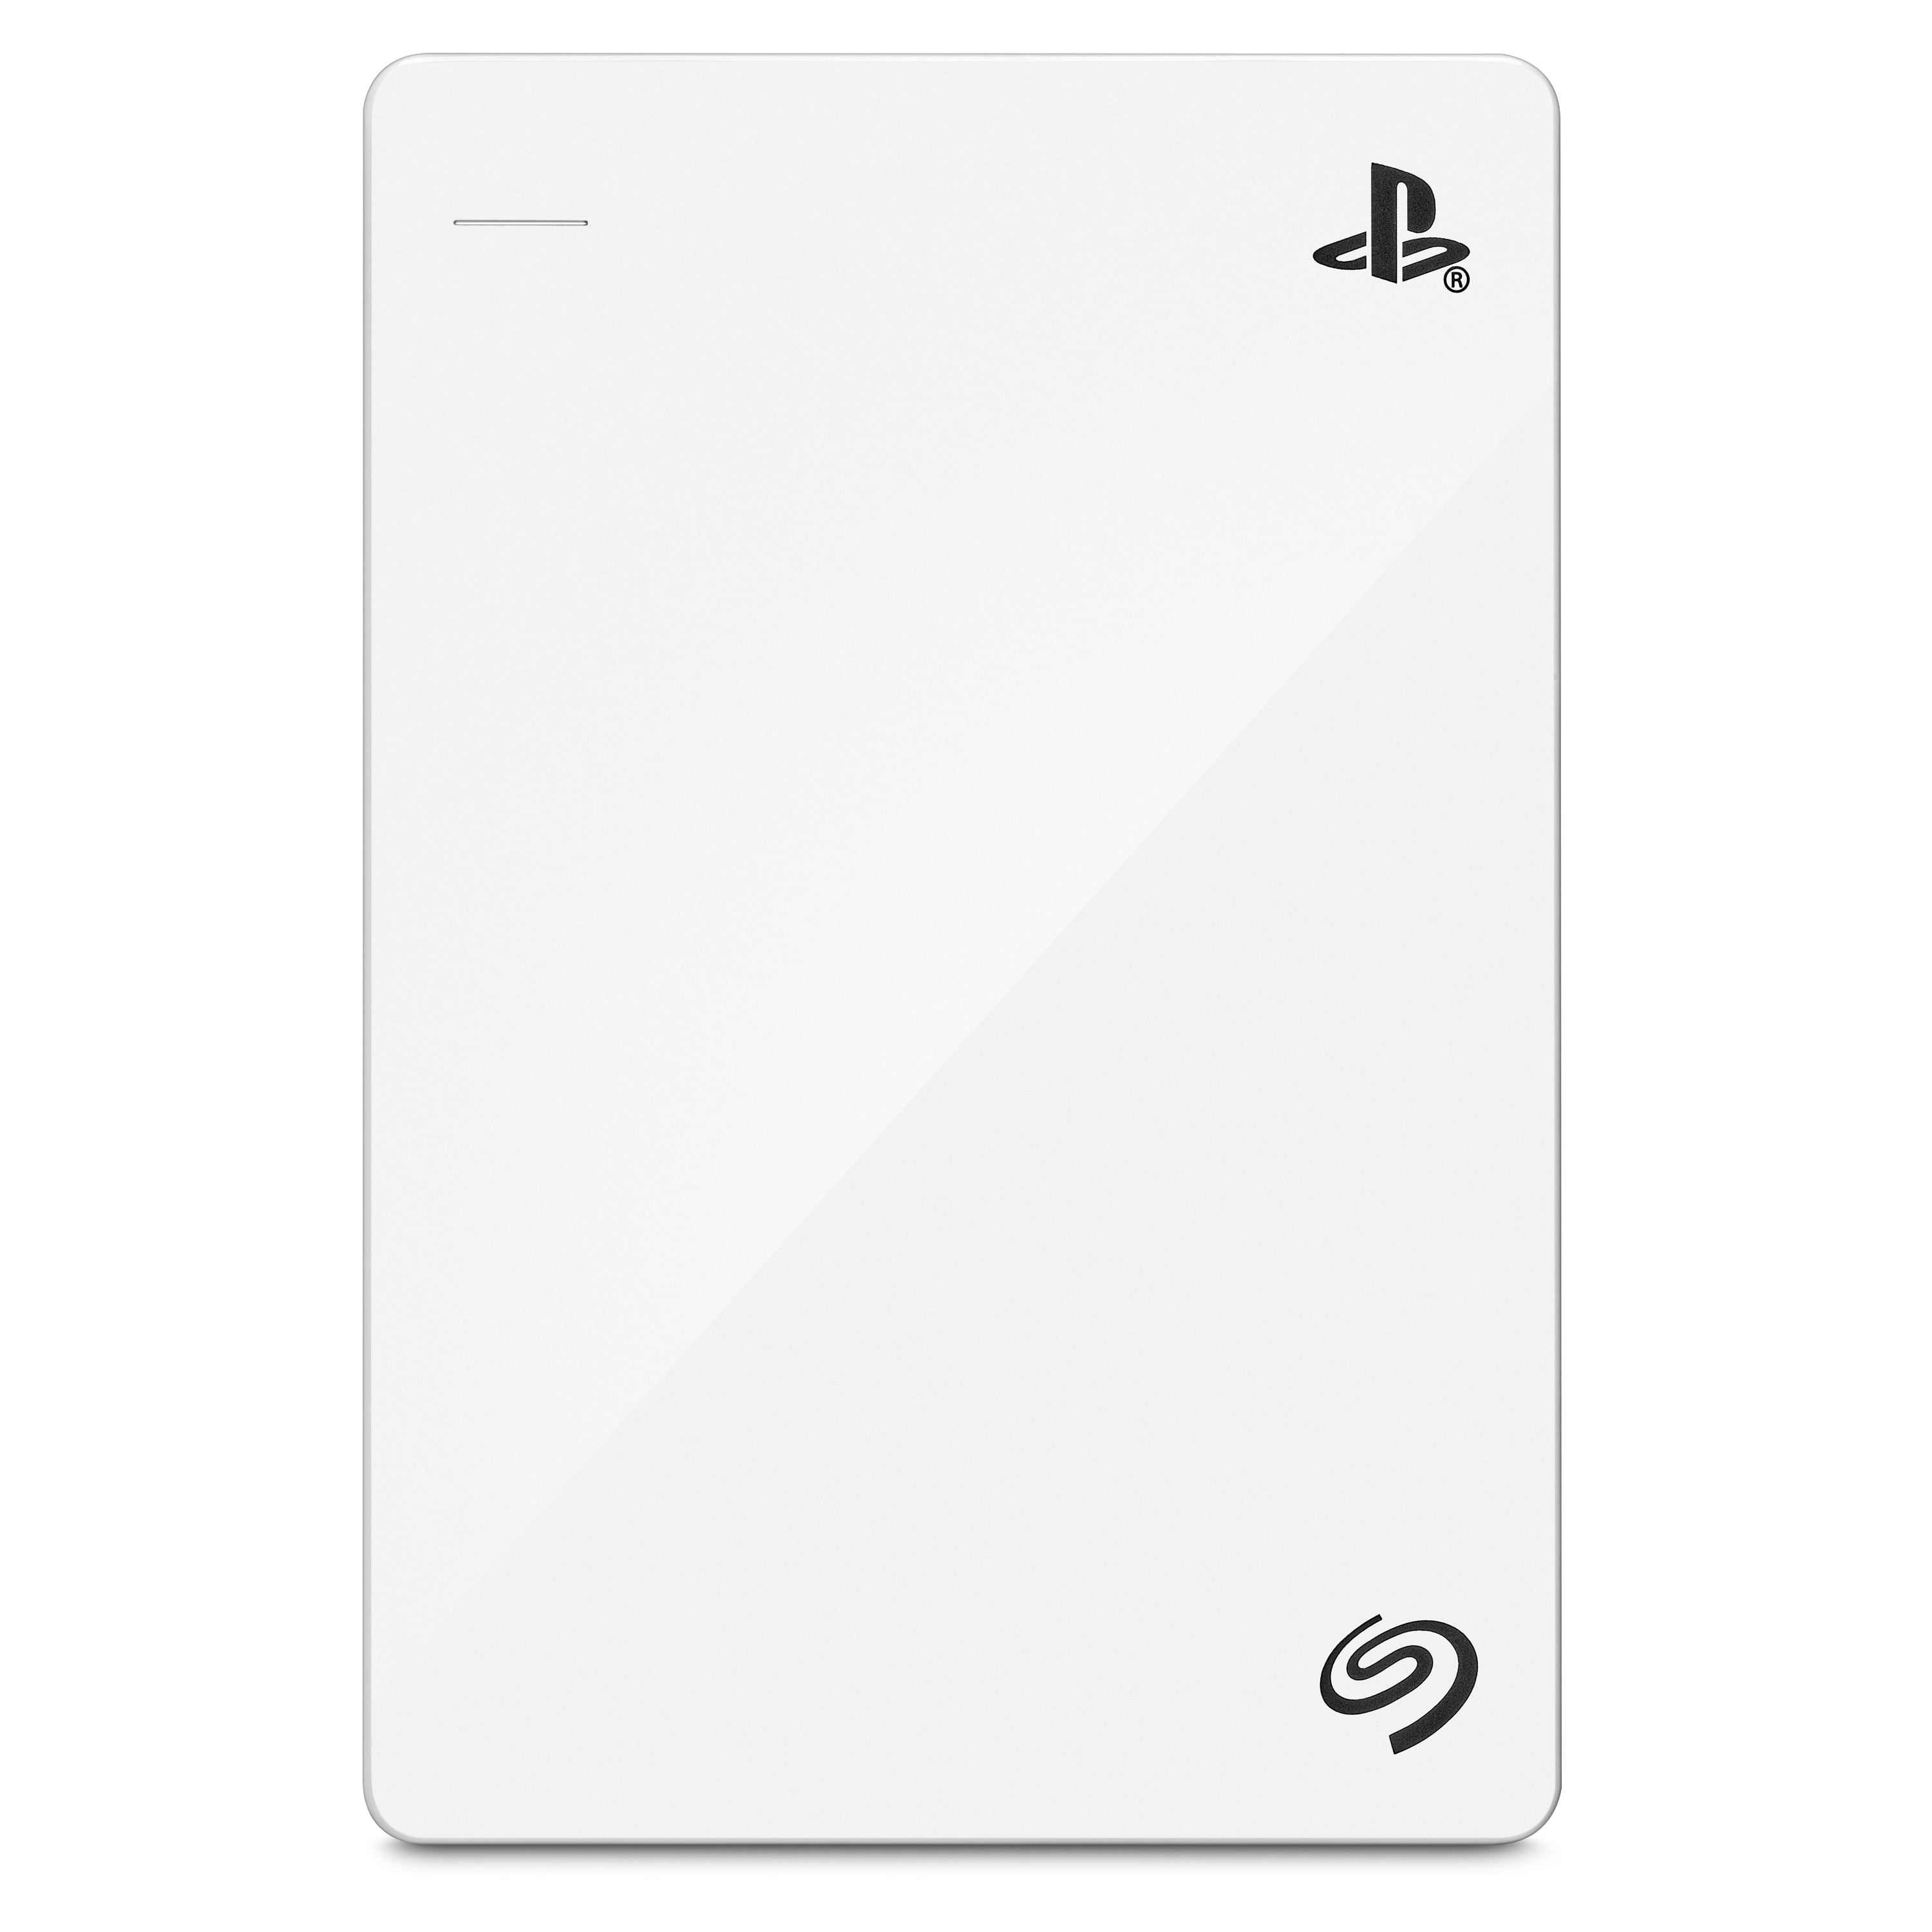 Seagate Game Drive PlayStation Consoles 2TB External Portable Hard Drive USB 3.0 Licensed White - Walmart.com